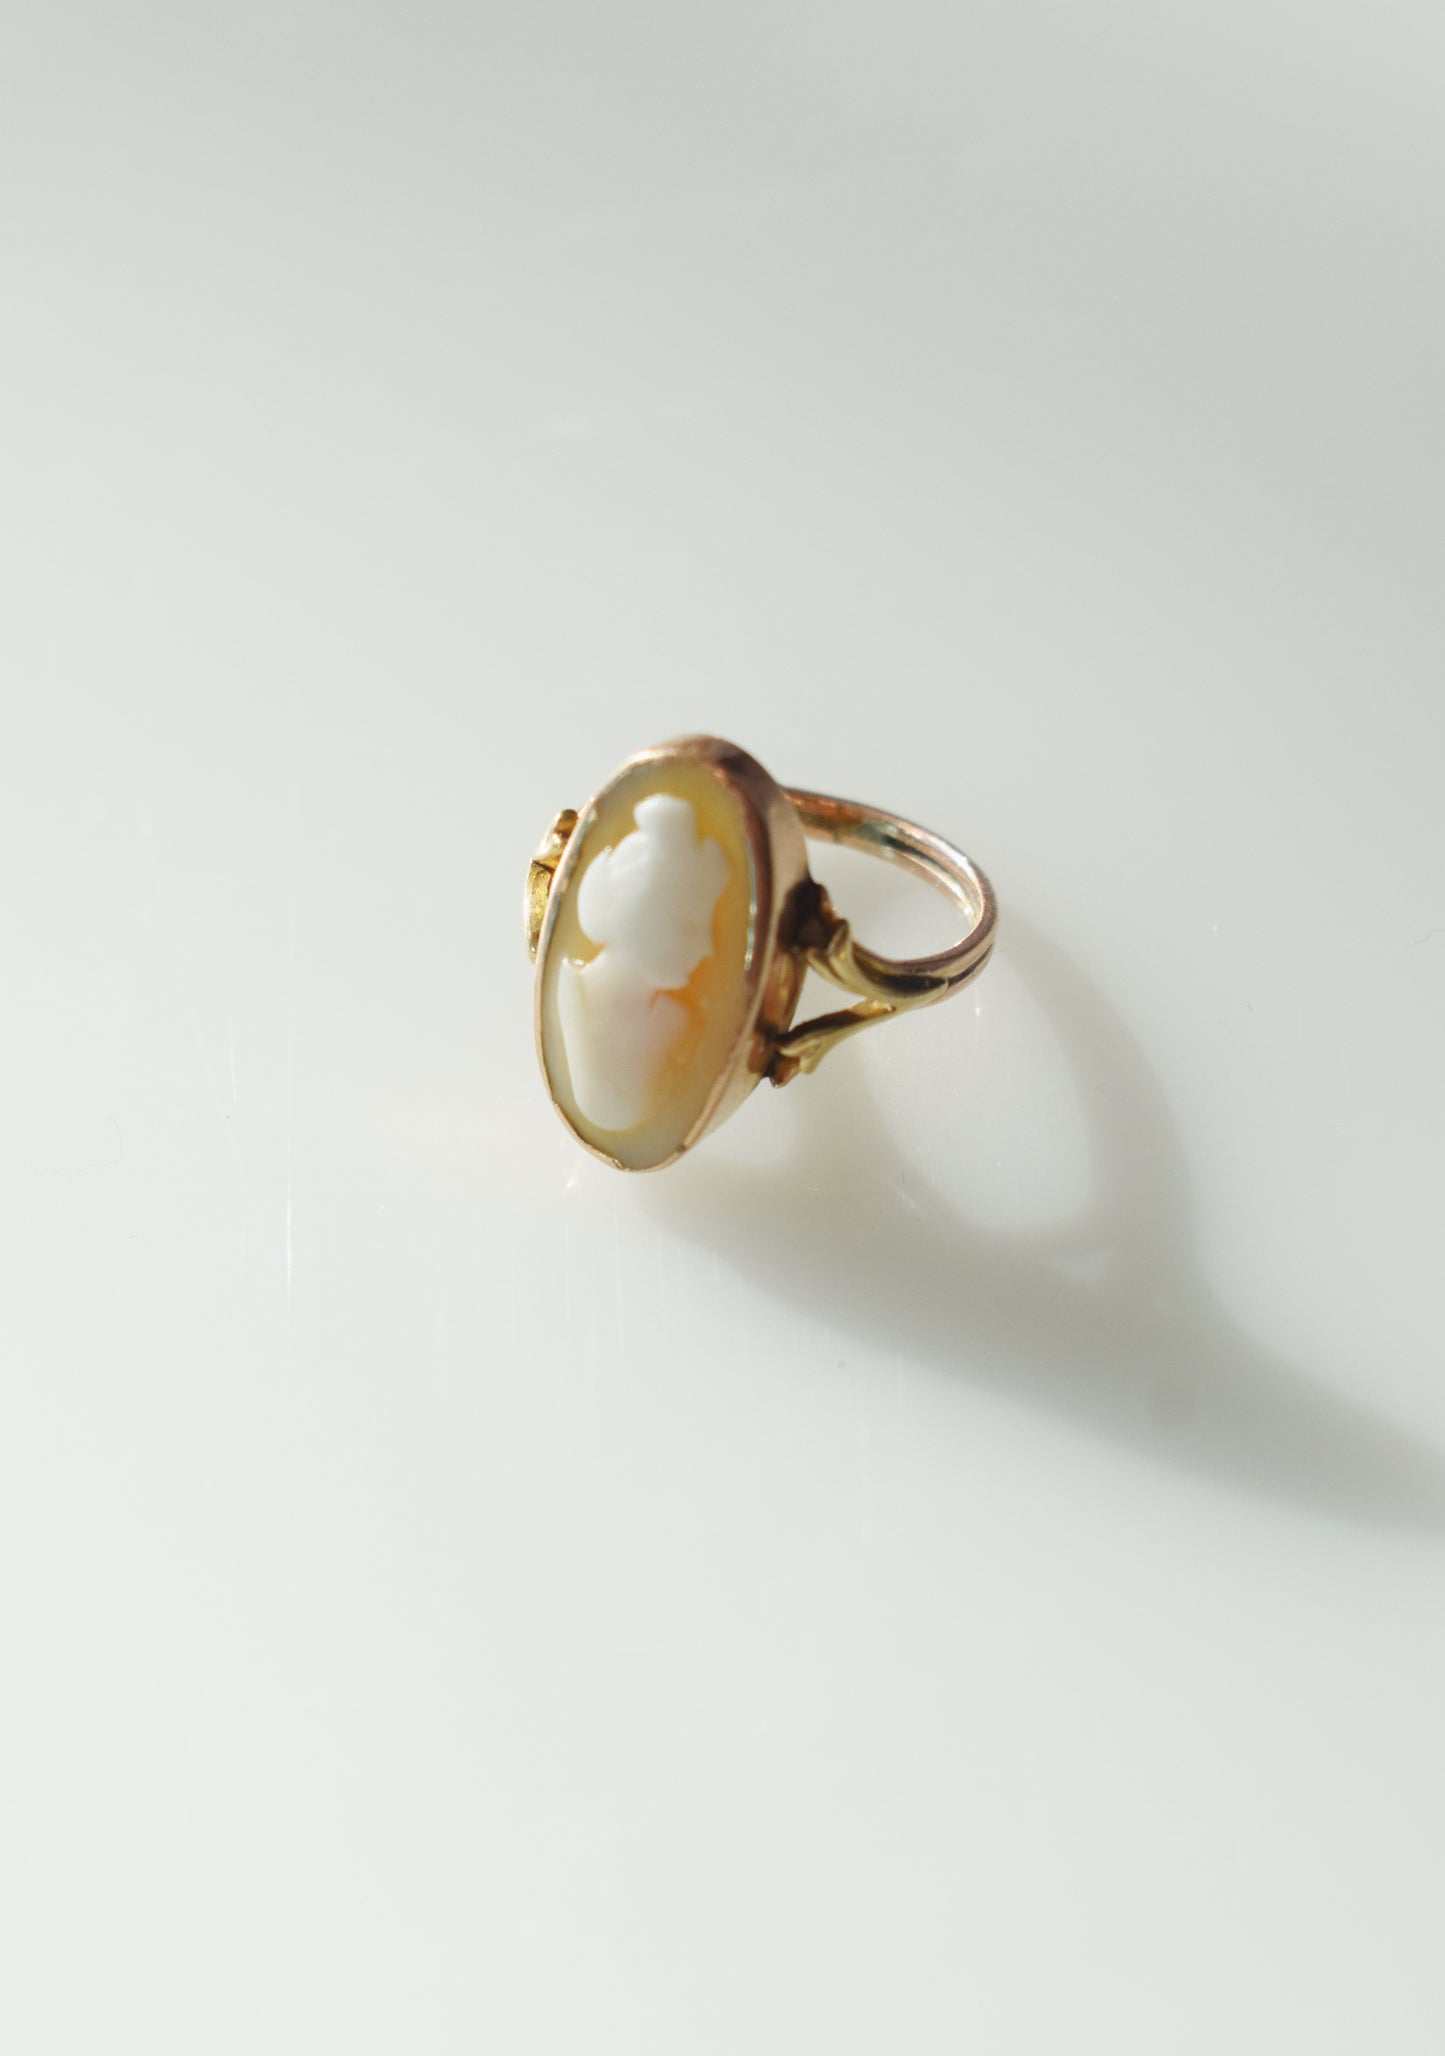 Antique 14kt Rose Gold Cameo Ring